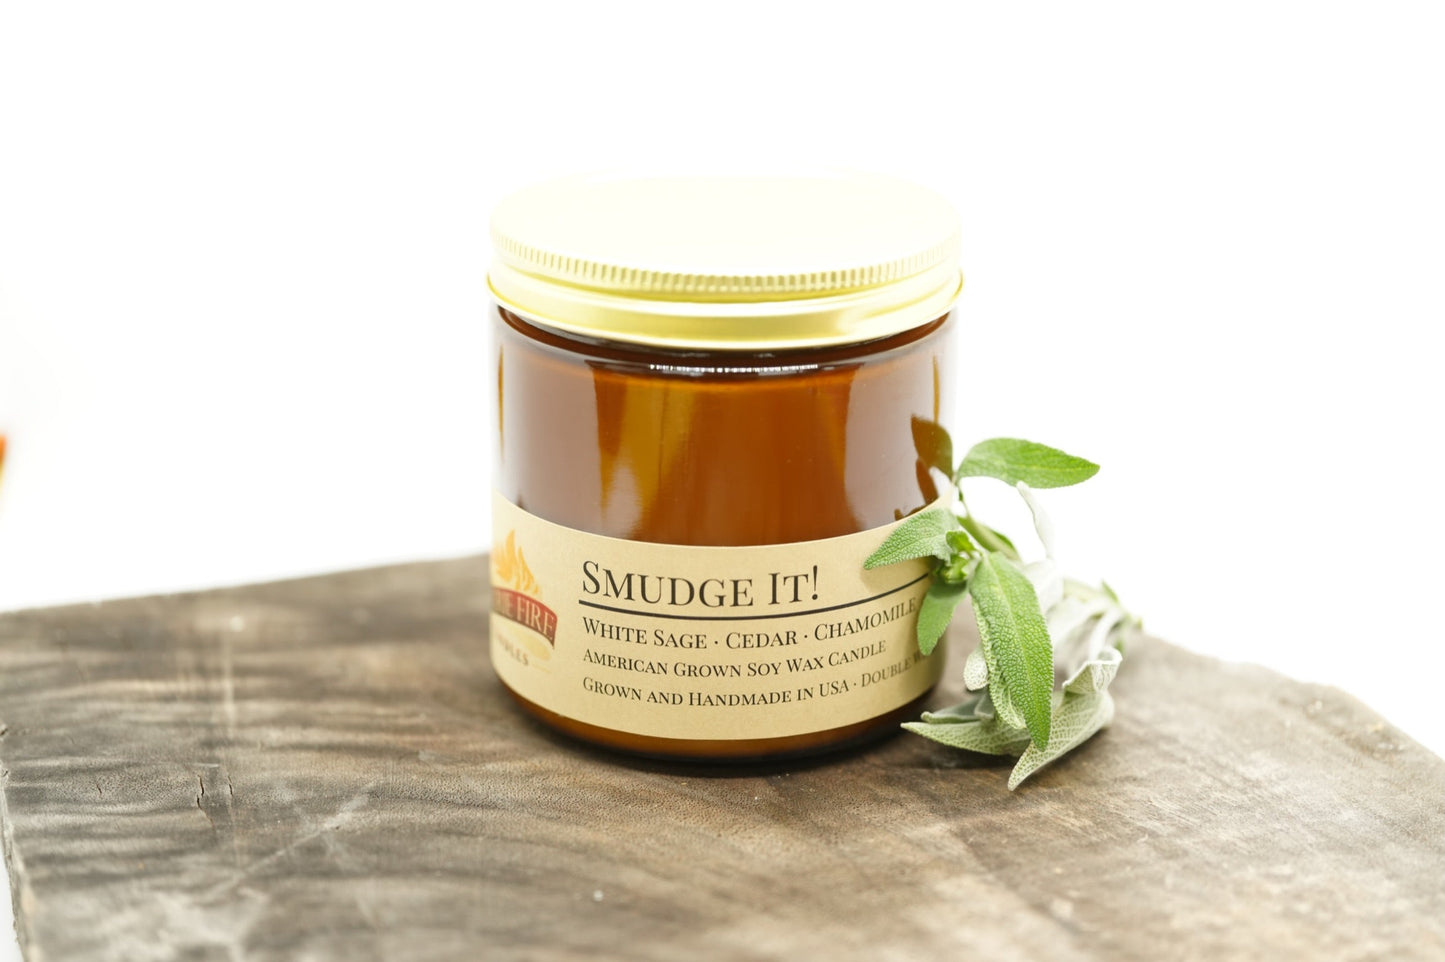 Smudge It! Soy Candle | 16 oz Double Wick Amber Apothecary Jar